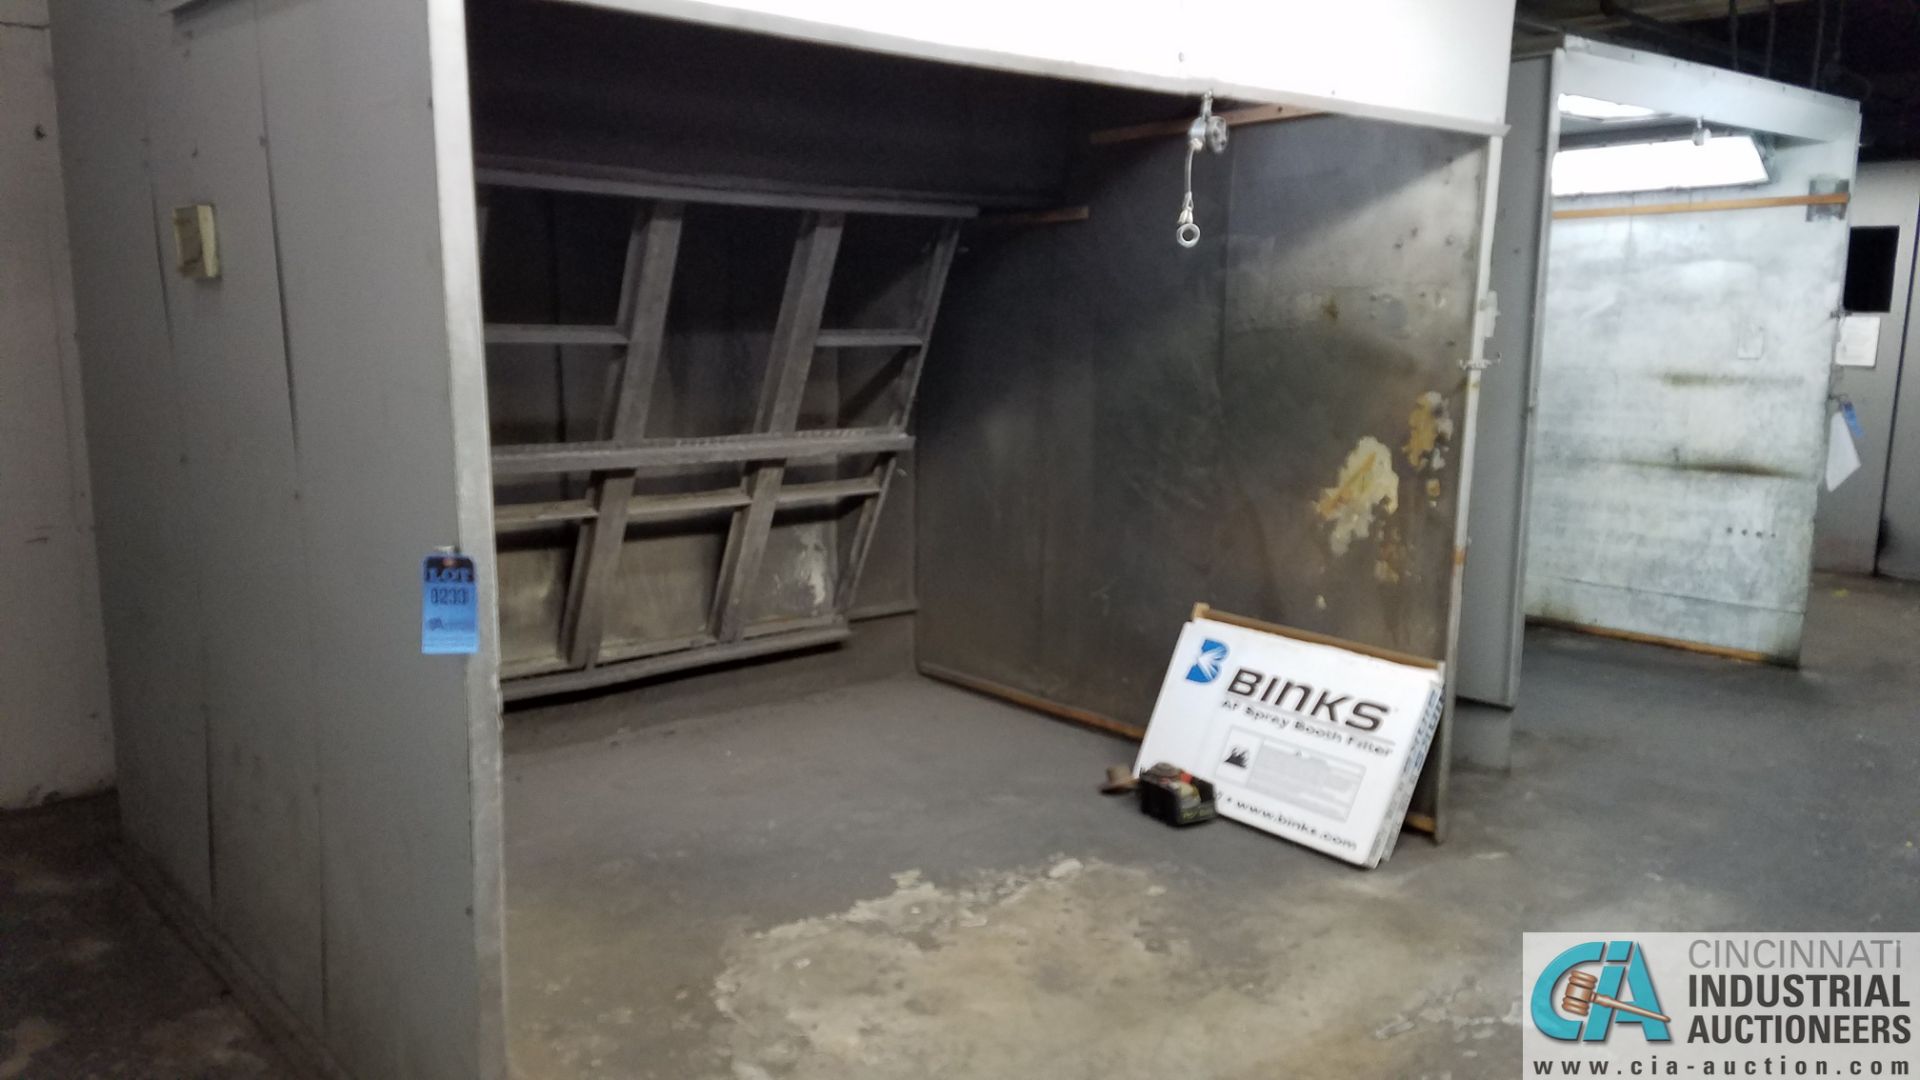 10' X 6' X 80" HIGH (APPROX.) REAR DRAFT DRIVE-IN PAINT BOOTH **BUYER MUST CAP EXHAUST THROUGH